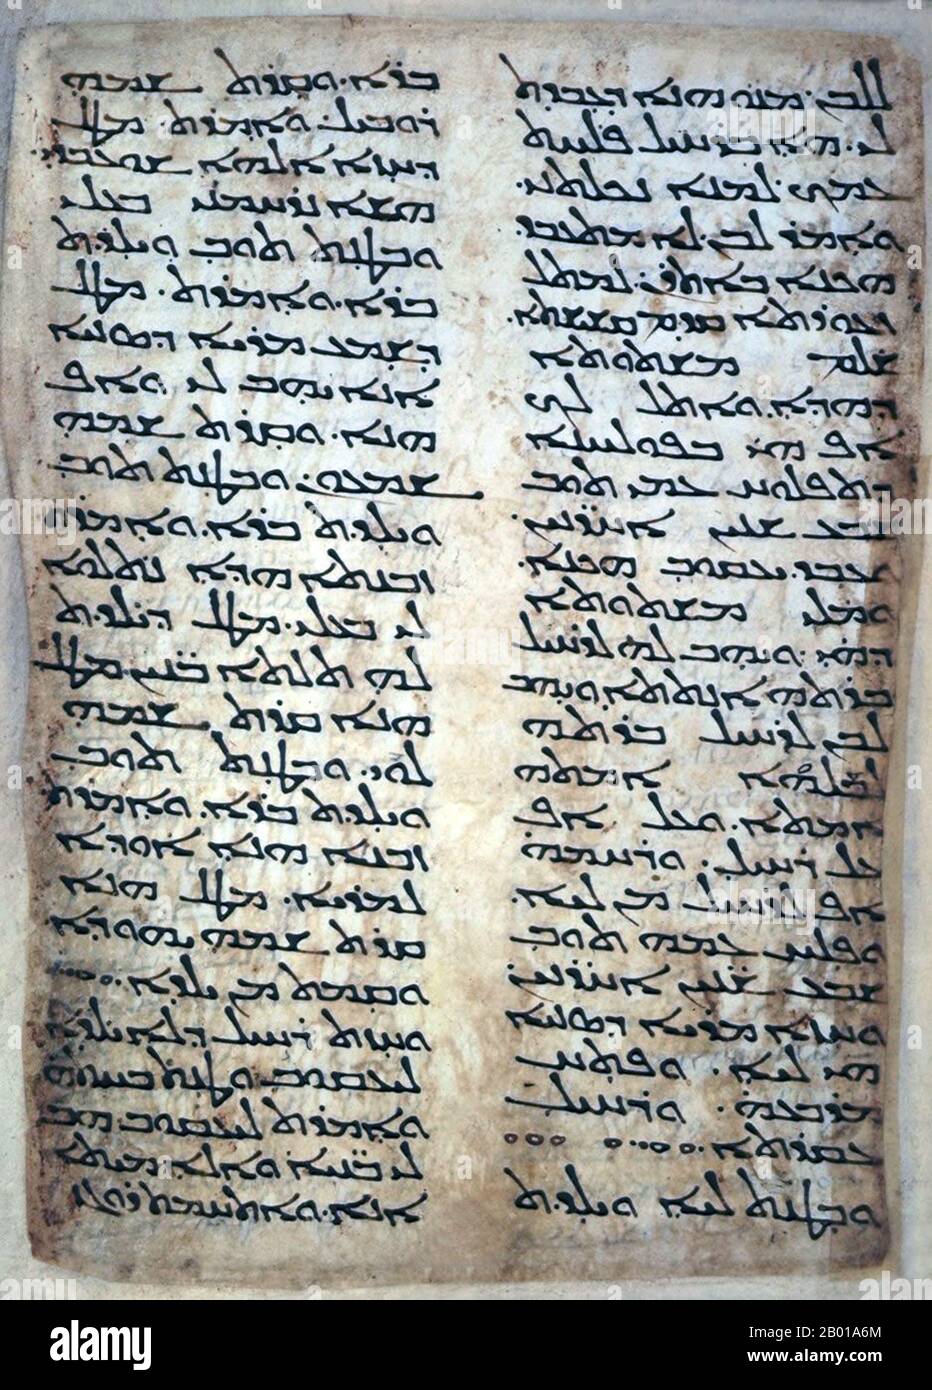 Syria: Nestorian text in Syriac script, c. 5th century CE.  Nestorius developed his Christological views as an attempt to rationally explain and understand the incarnation of the divine Logos, the Second Person of the Holy Trinity as the man Jesus Christ. He had studied at the School of Antioch where his mentor had been Theodore of Mopsuestia; Theodore and other Antioch theologians had long taught a literalist interpretation of the Bible and stressed the distinctiveness of the human and divine natures of Jesus. Nestorius took his Antiochene leanings with him when he was appointed Patriarch. Stock Photo